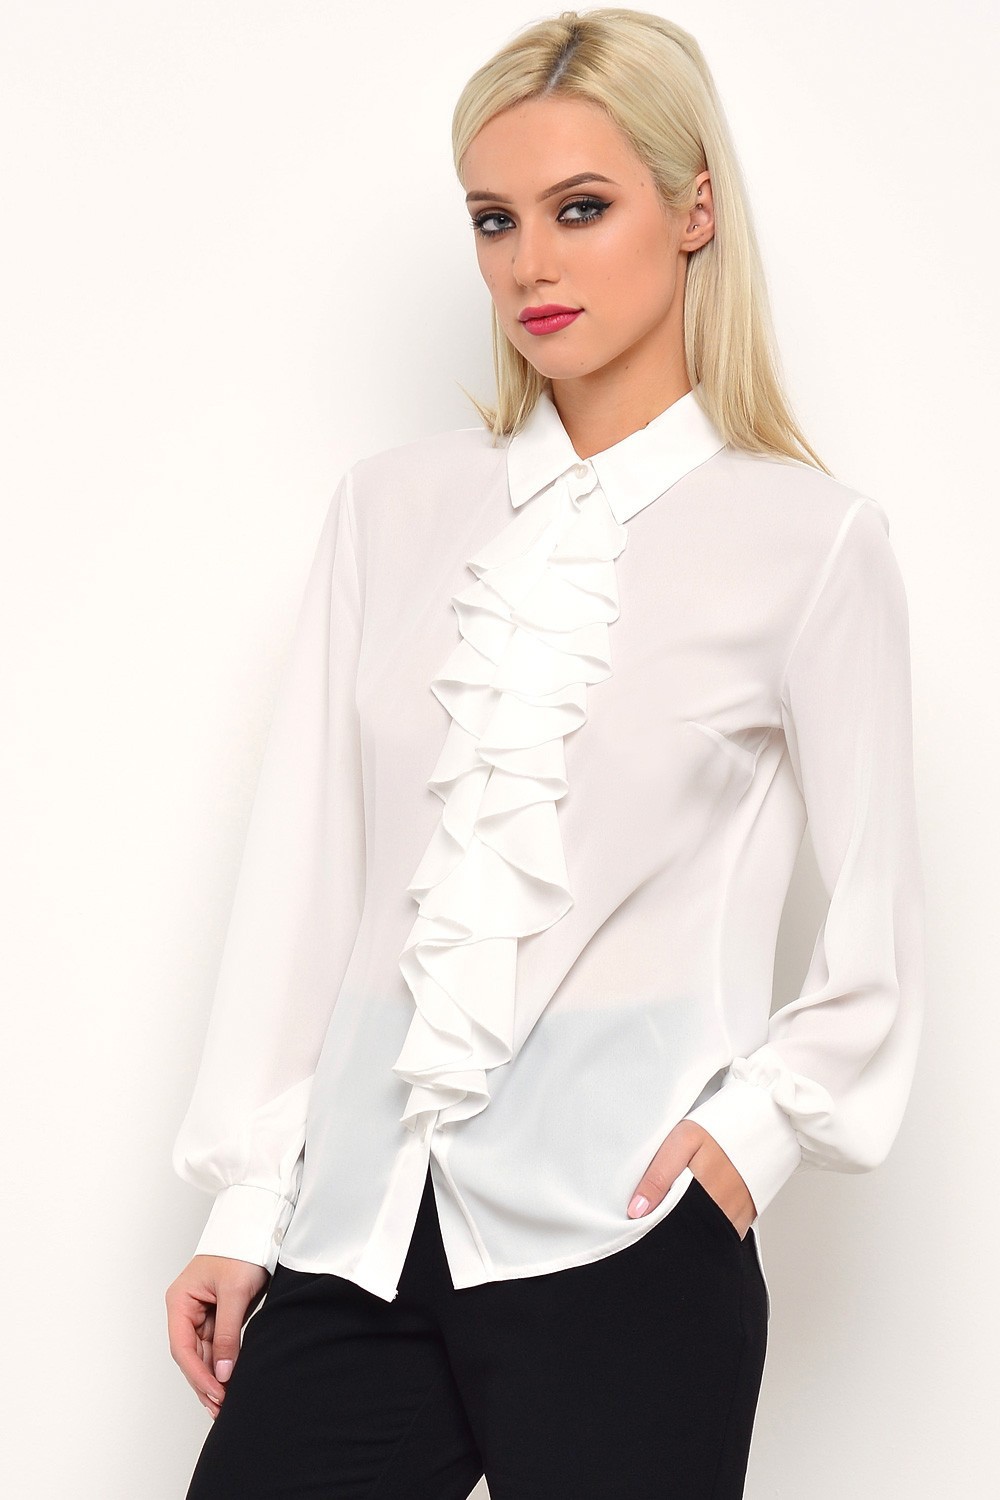 Ad Lib Misty Ruffle Blouse in White | iCLOTHING